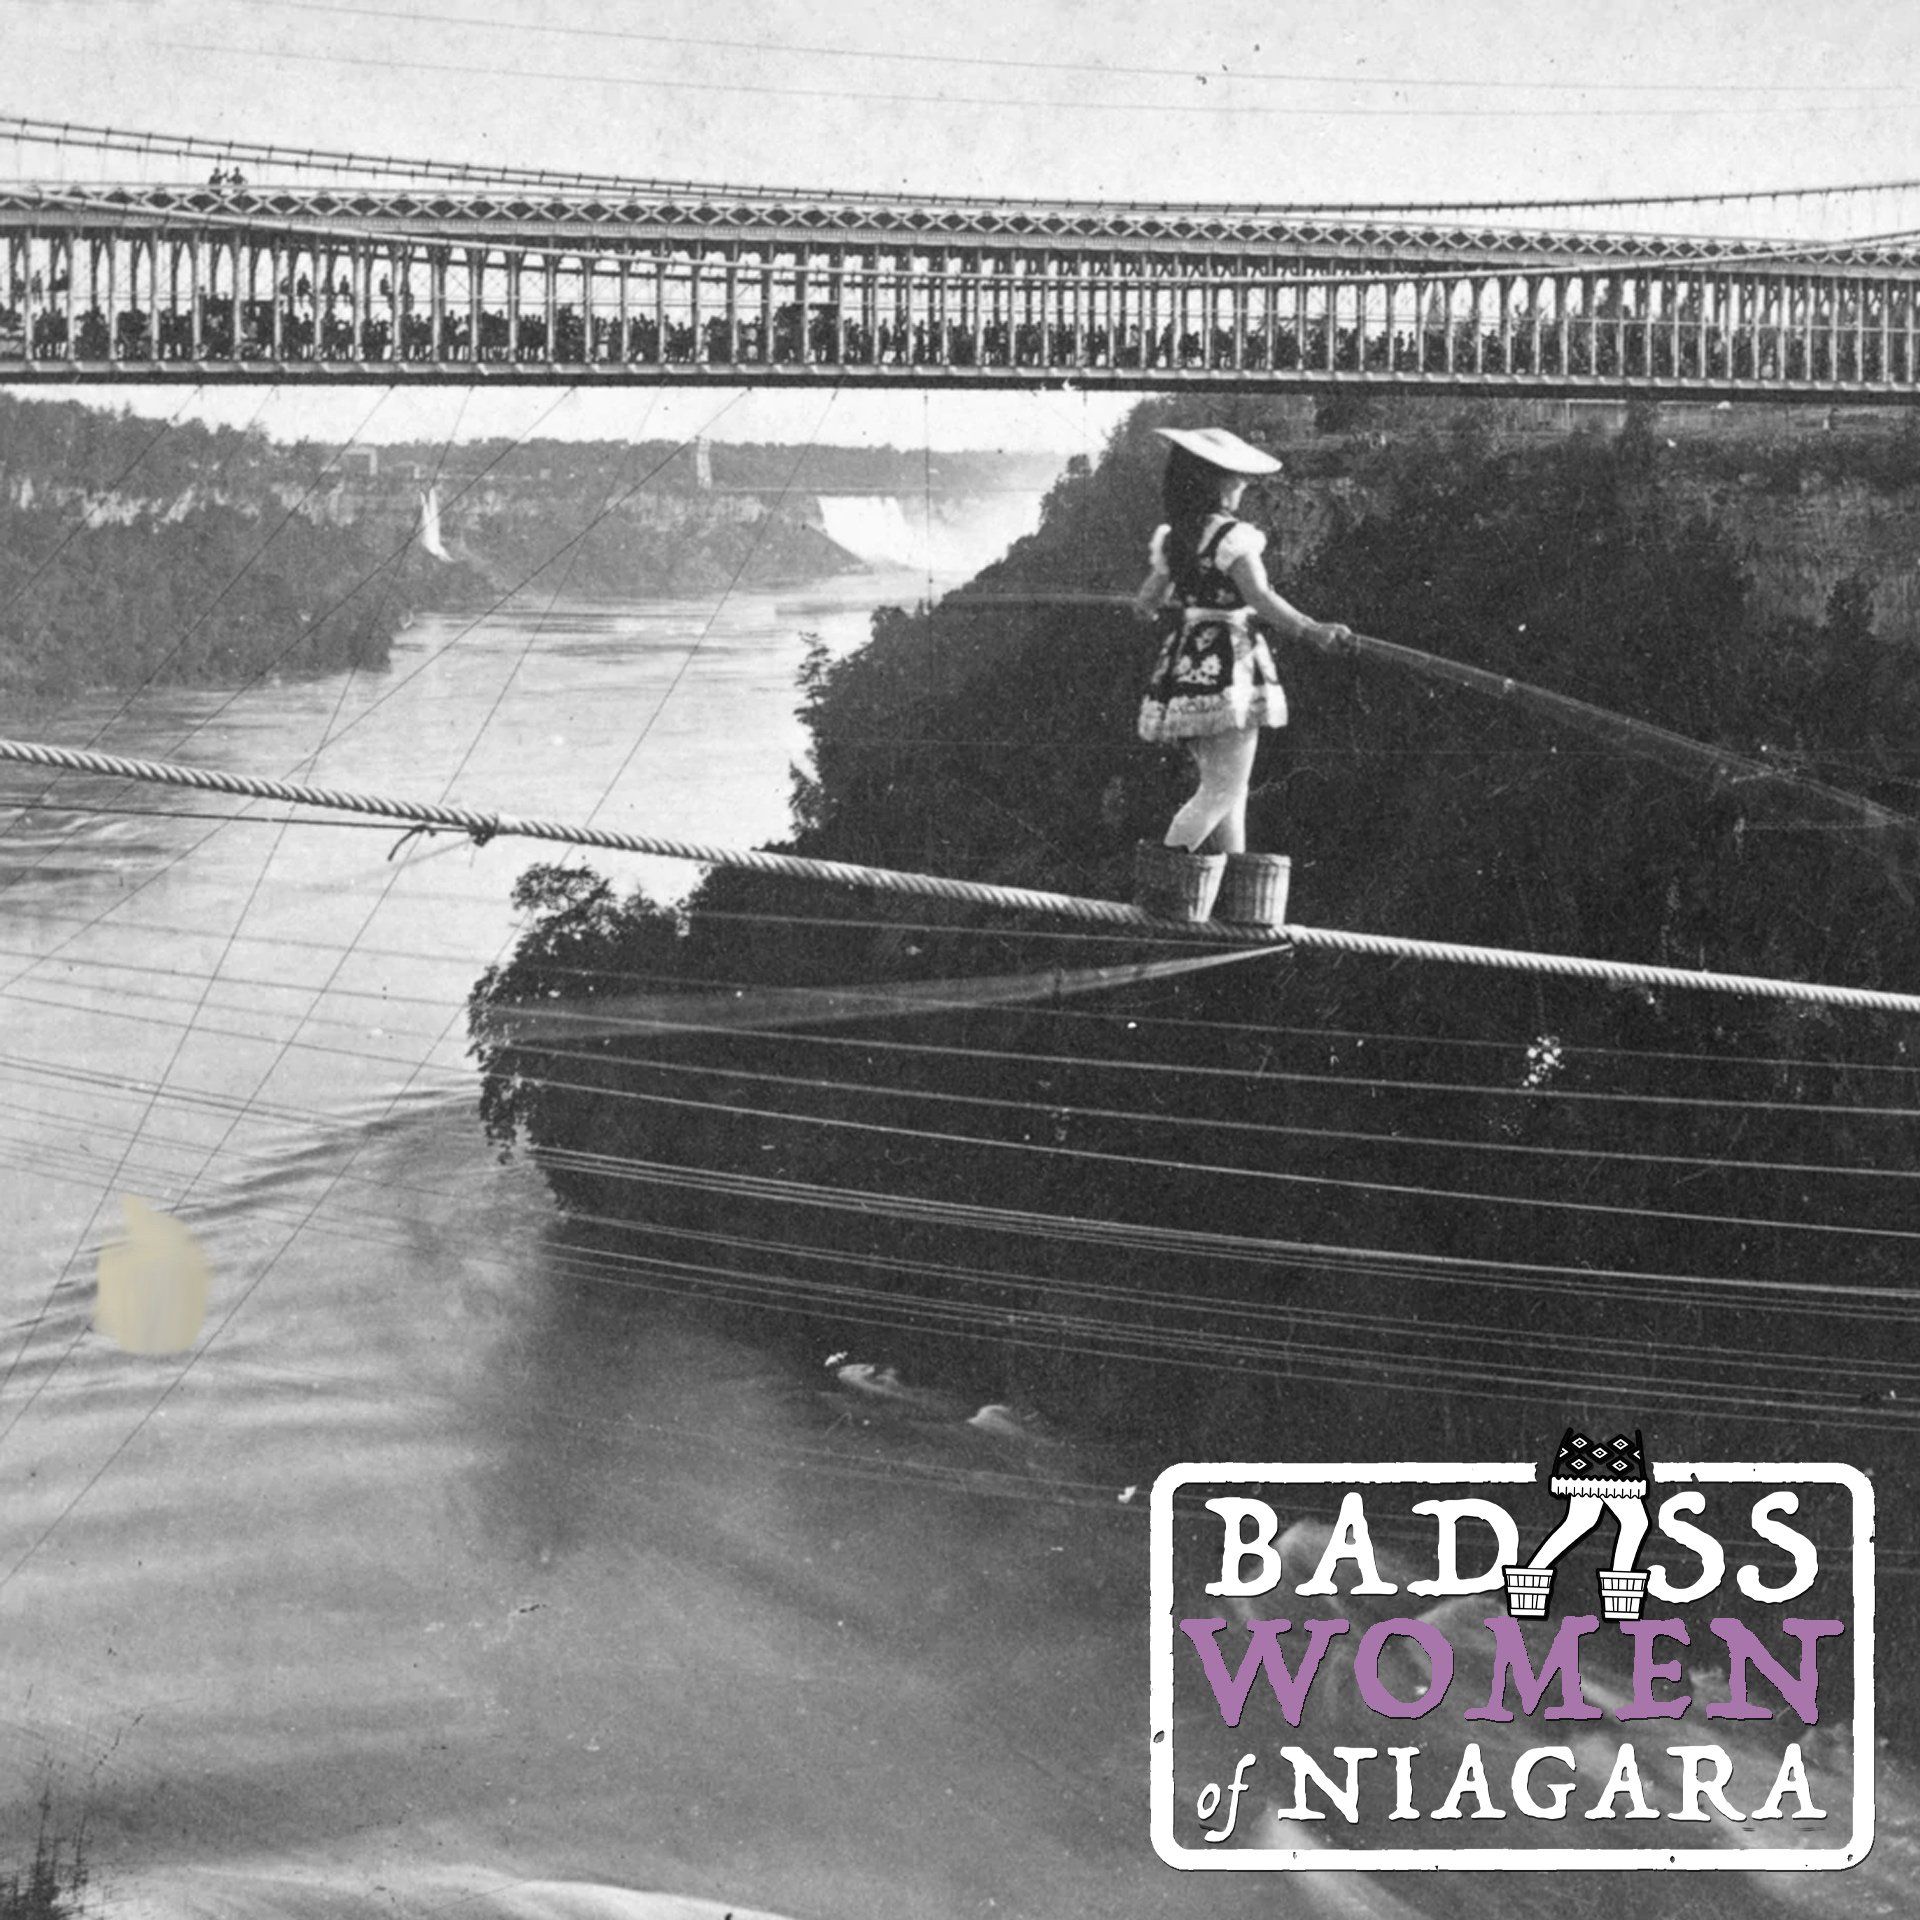 Maria Spelterini (July 7, 1853 - October 19, 1912) was an Italian tightrope walker who was the only woman to cross the Niagara gorge on a tightrope, which she did on July 8, 1876 as part of a celebration of the U.S. Centennial. She used two and a quarter inch wire and crossed just north of the lower suspension bridge. She crossed again on July 12, 1876, this time wearing peach baskets strapped to her feet, just because she could. She crossed blindfolded on July 19, and for good measure, on July 22, she crossed with her ankles and wrists manacled. She was famous for wearing outrageous costumes.